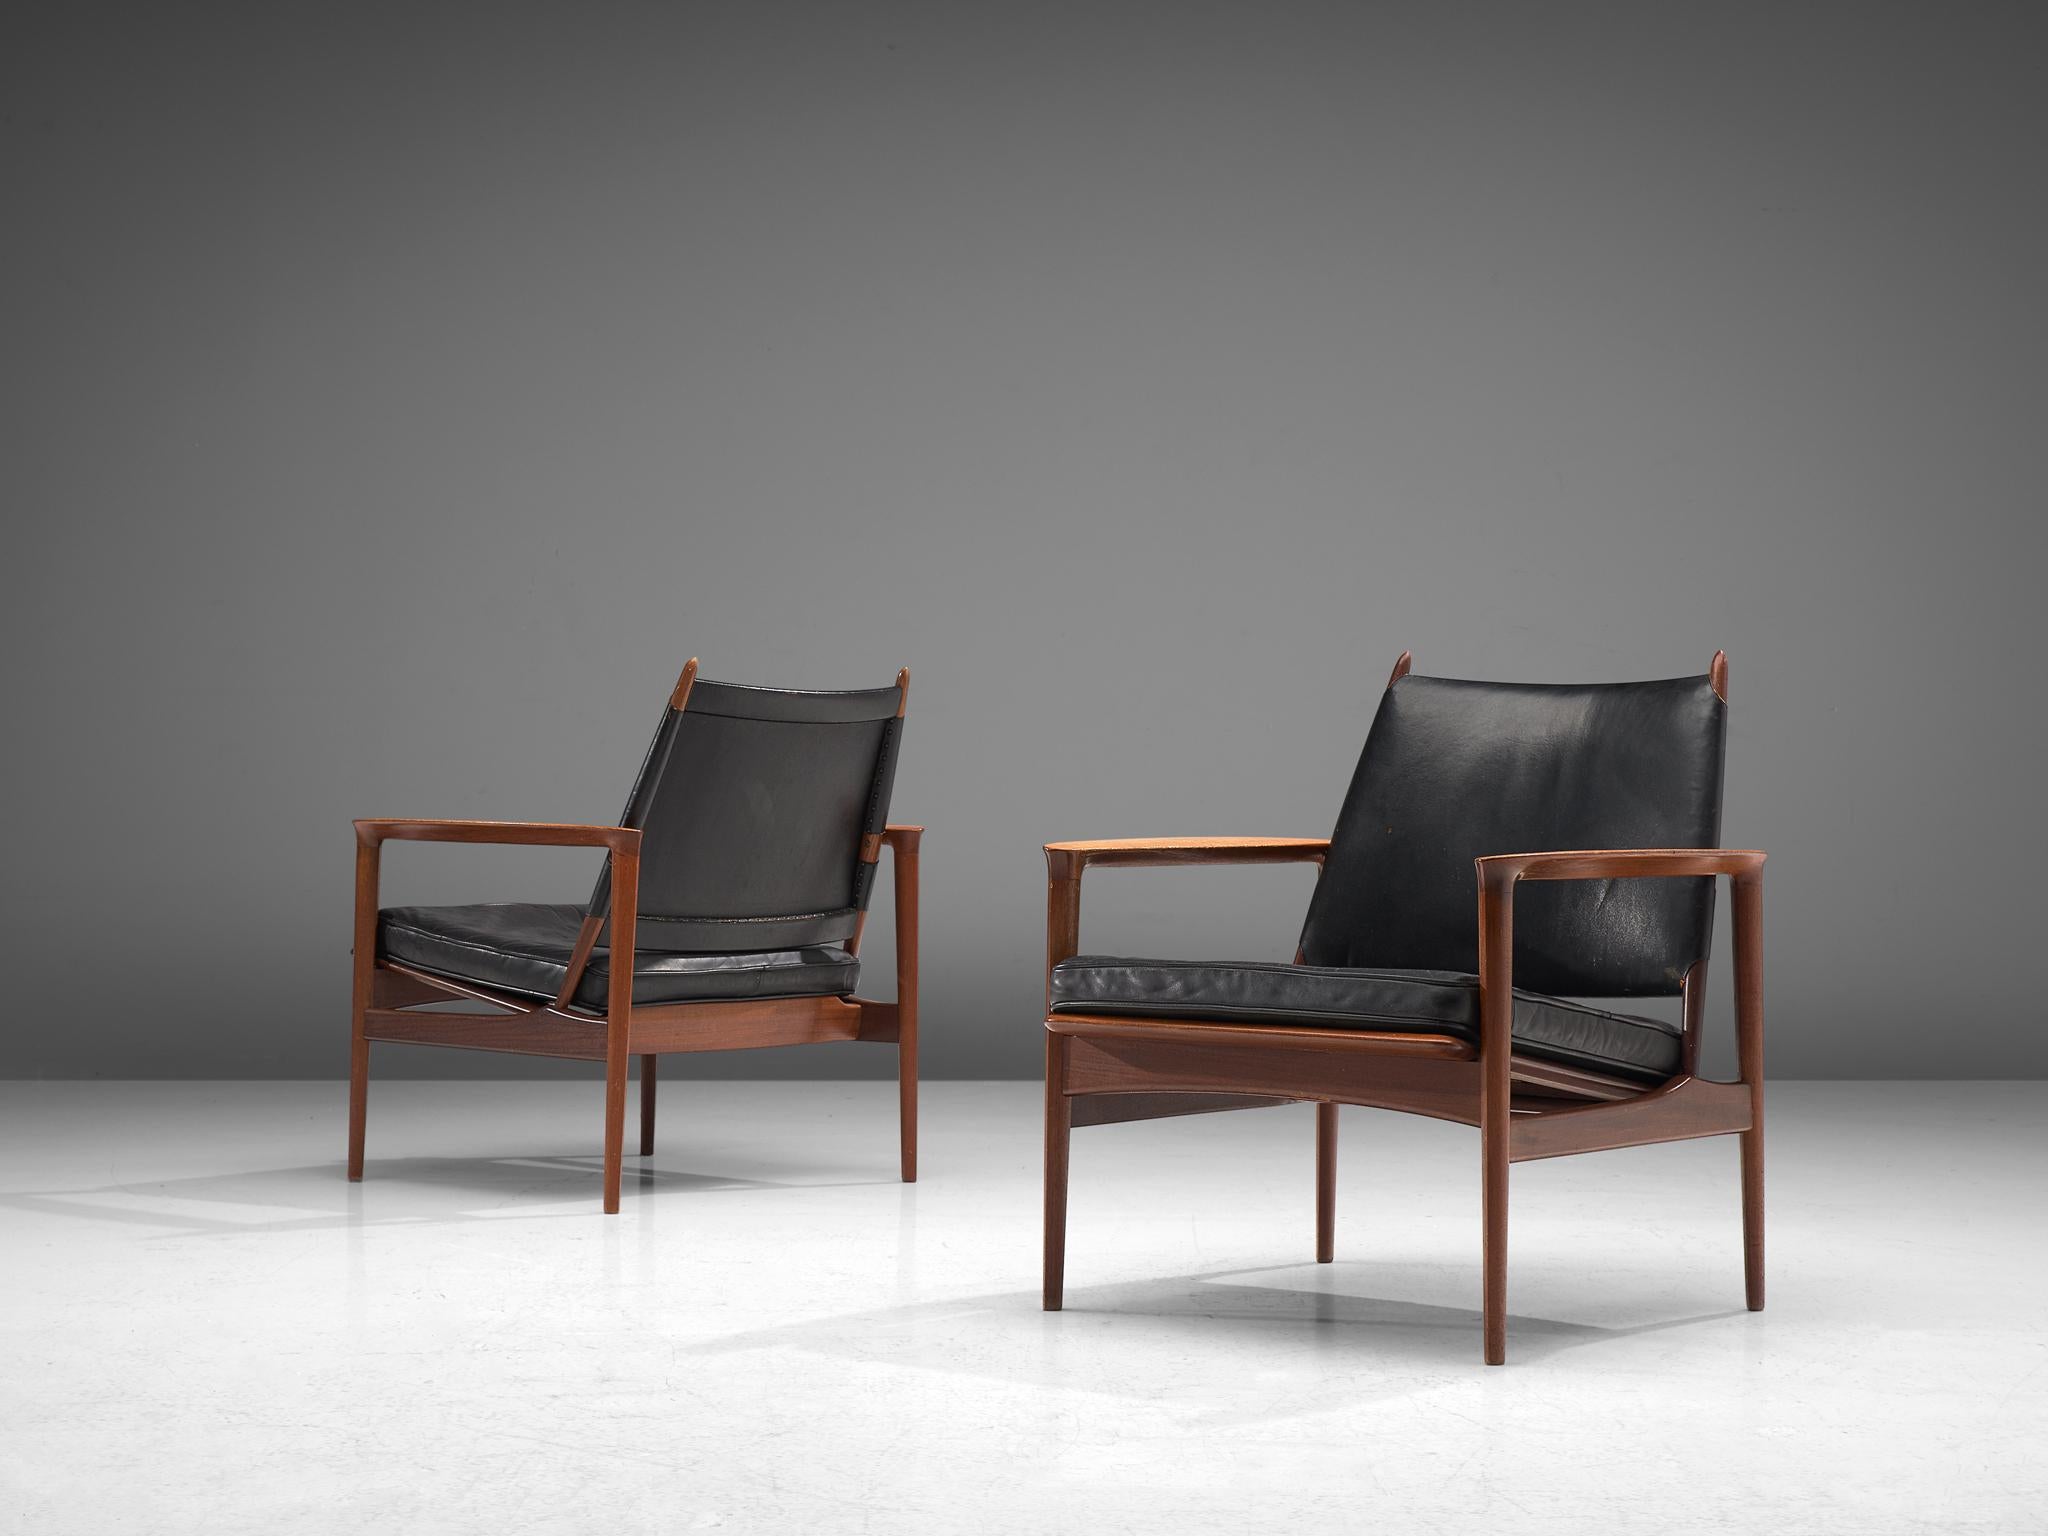 Torbjørn Afdal pair of armchairs in teak and black leather, Norway, 1960s.

These rare armchairs by Torbjørn Afdal show outstanding craftsmanship. The woodwork is elegant, showing nice details and wood joints. Due to the openness of the frame, the